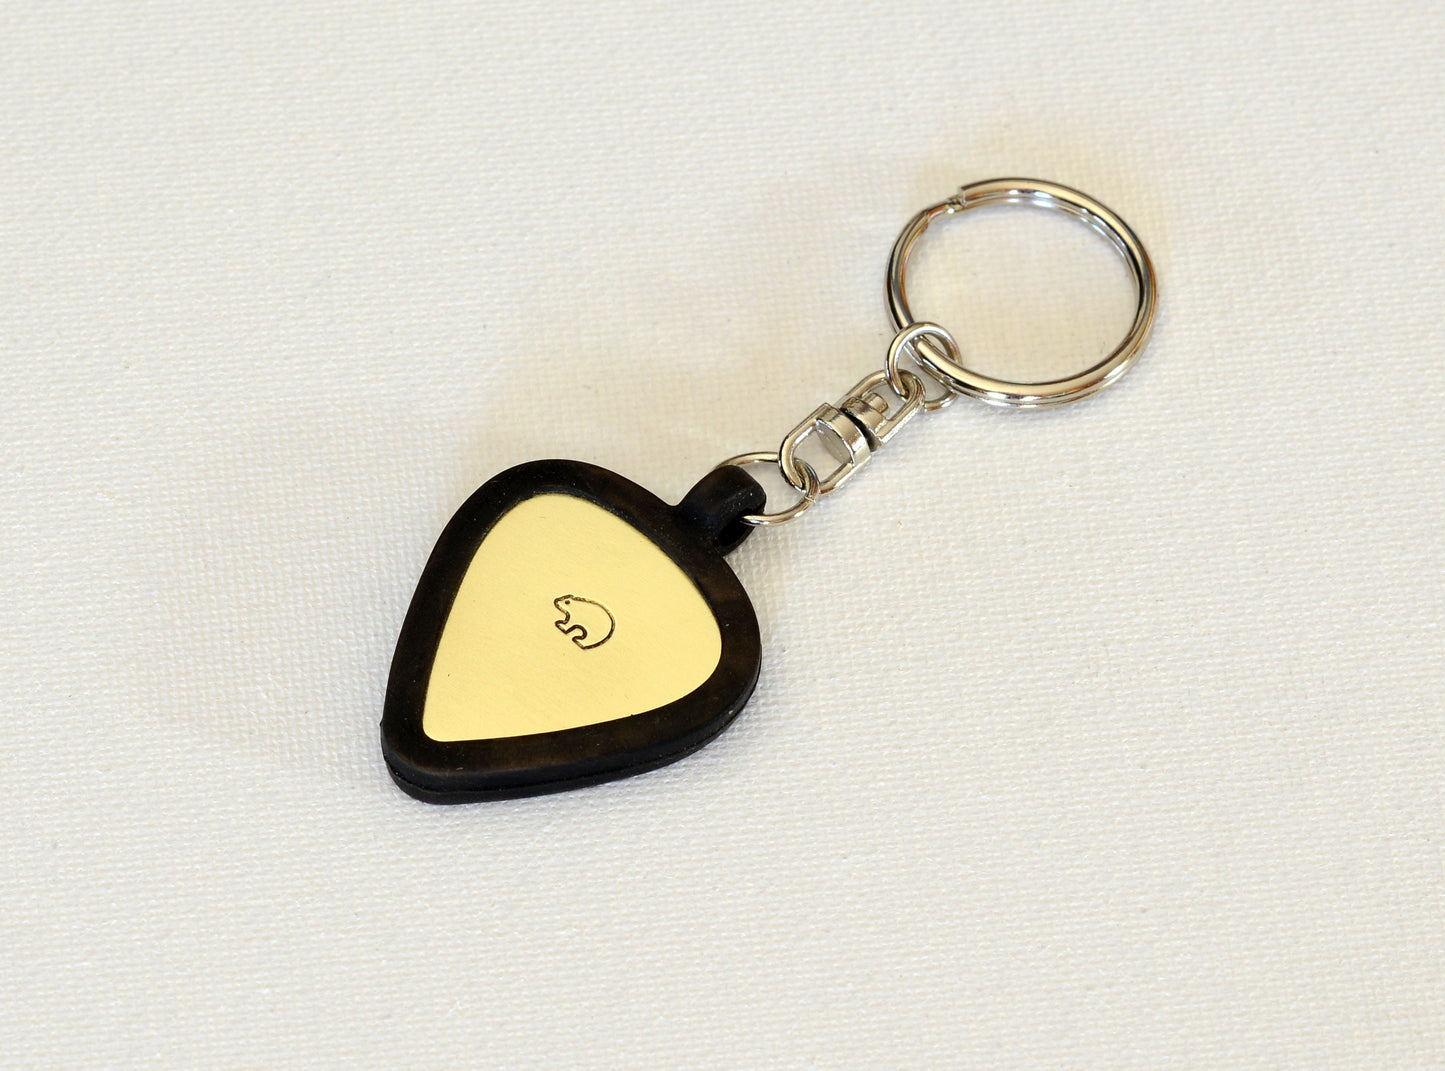 Brass guitar pick and a rubber guitar pick holder keychain